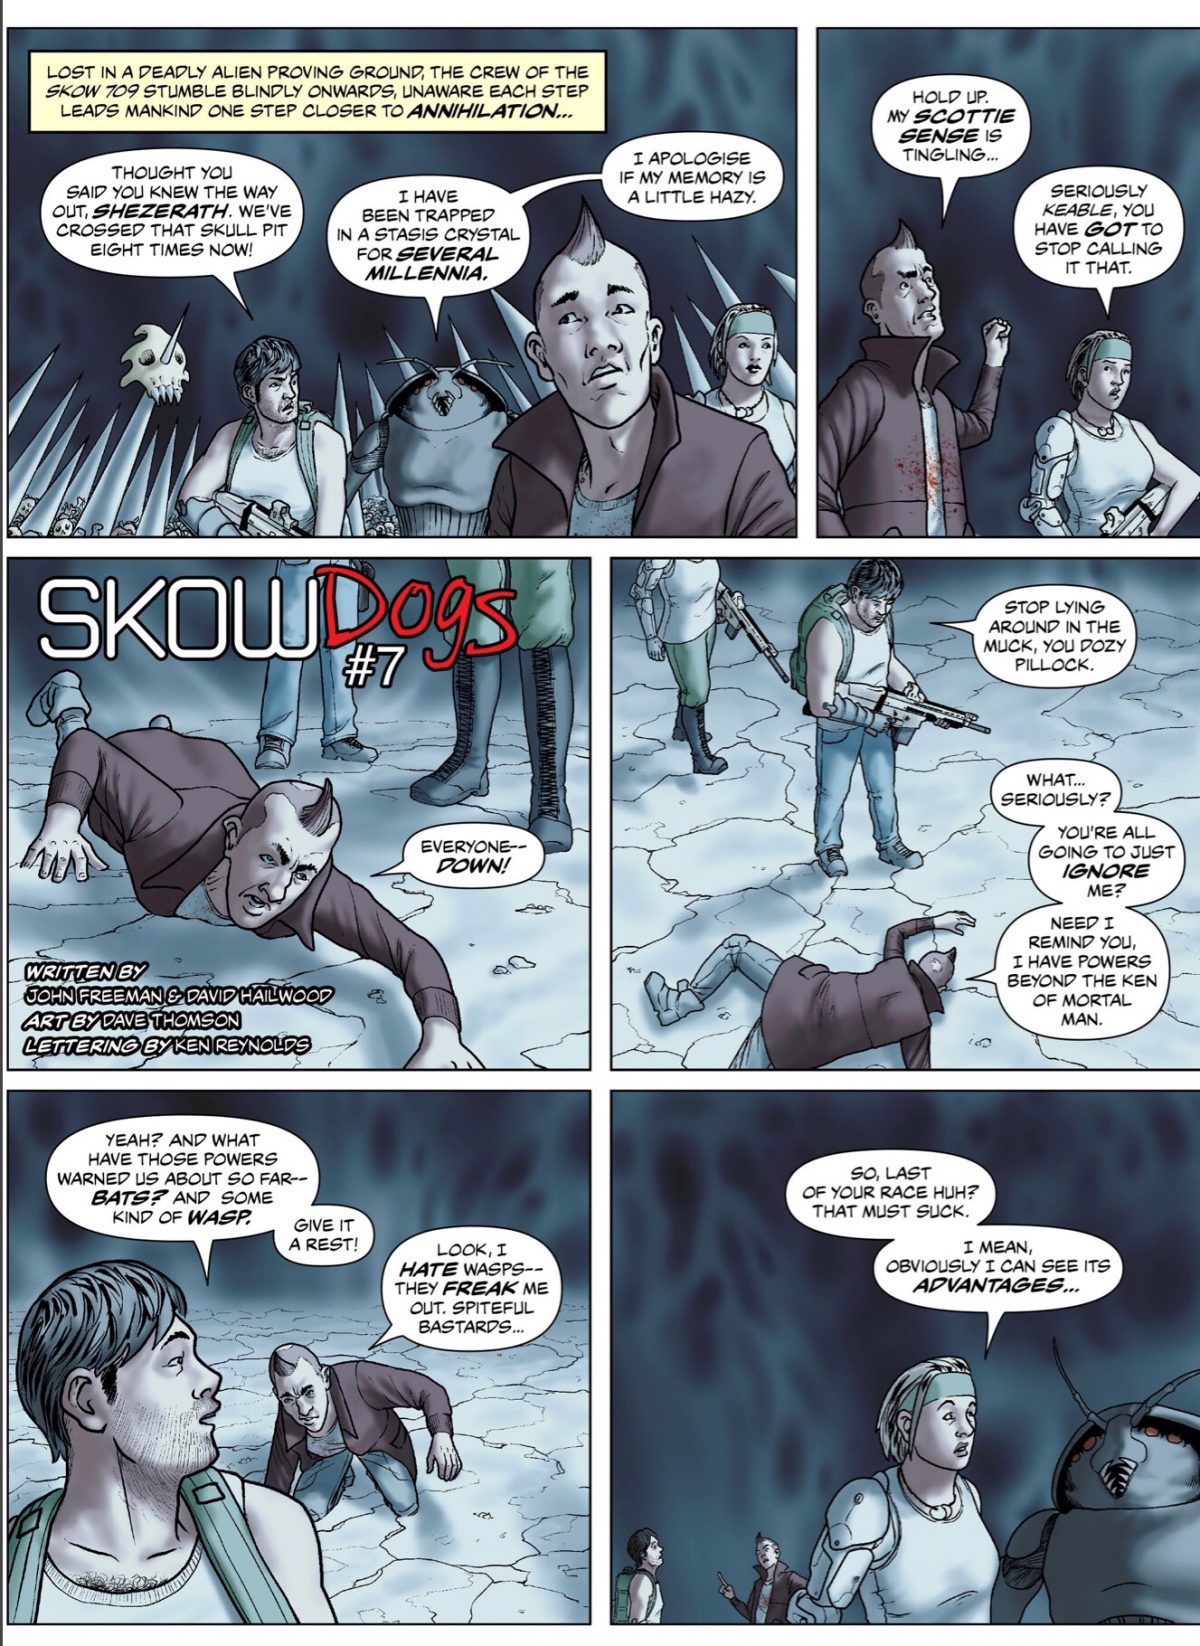 100% Biodegradable Issue 21 - Skow Dogs 